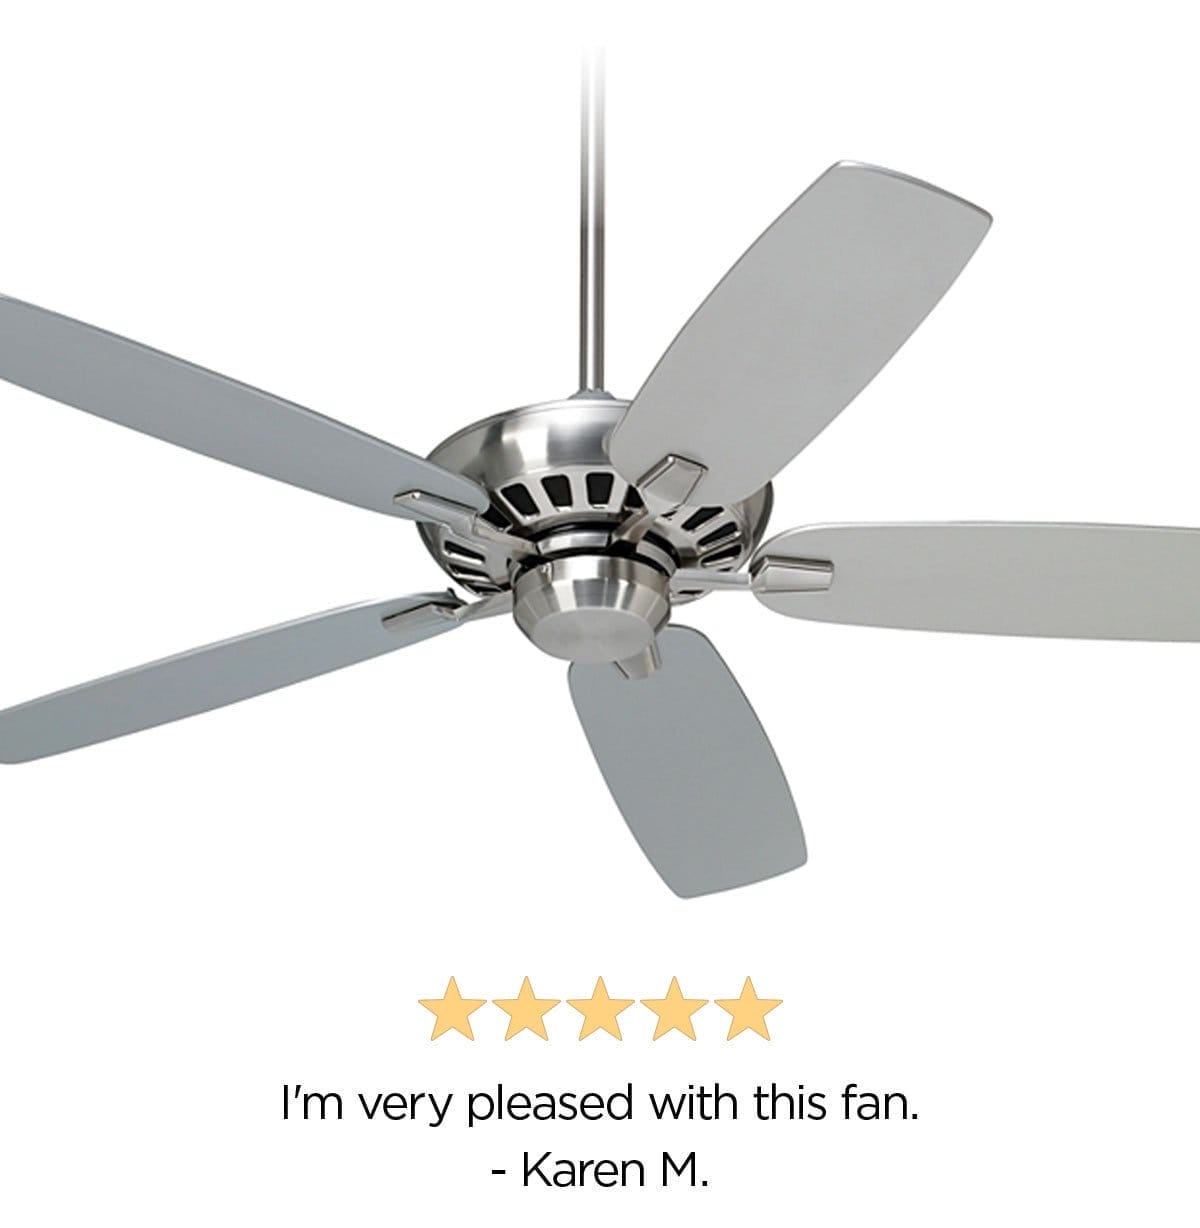 5 stars - I'm very pleased with this fan. - Karen M.